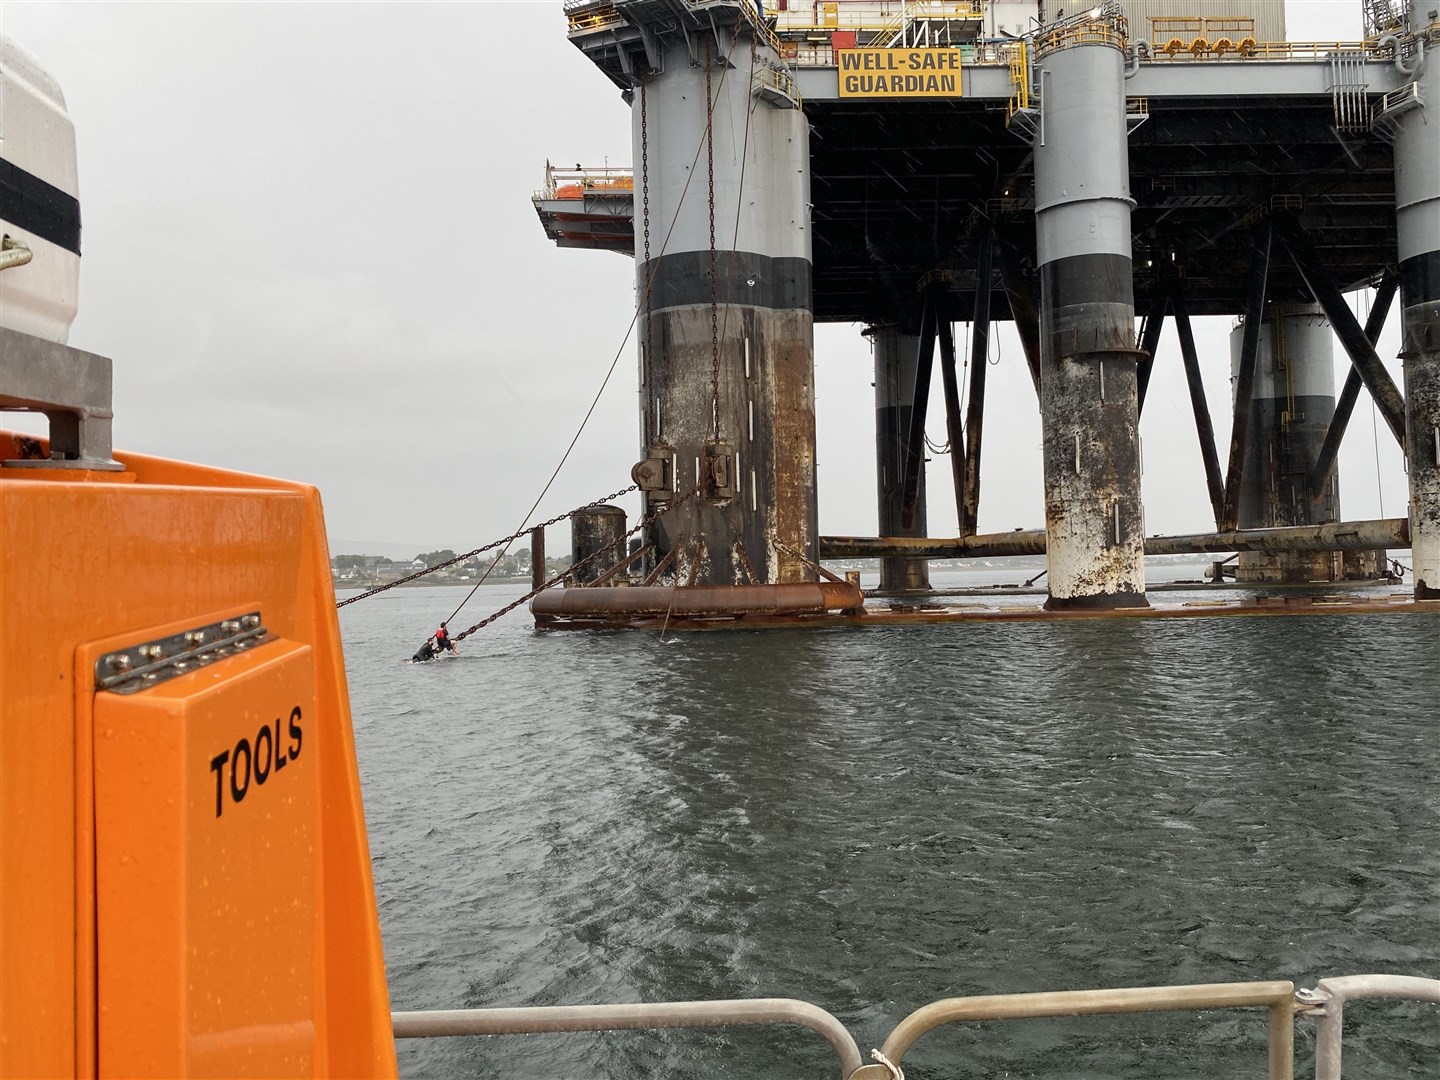 Stranded swimmers were left clutching an anchor of the oil rig anchor after getting into difficulties in the Cromarty Firth near Invergordon. Picture: Invergordon RNLI